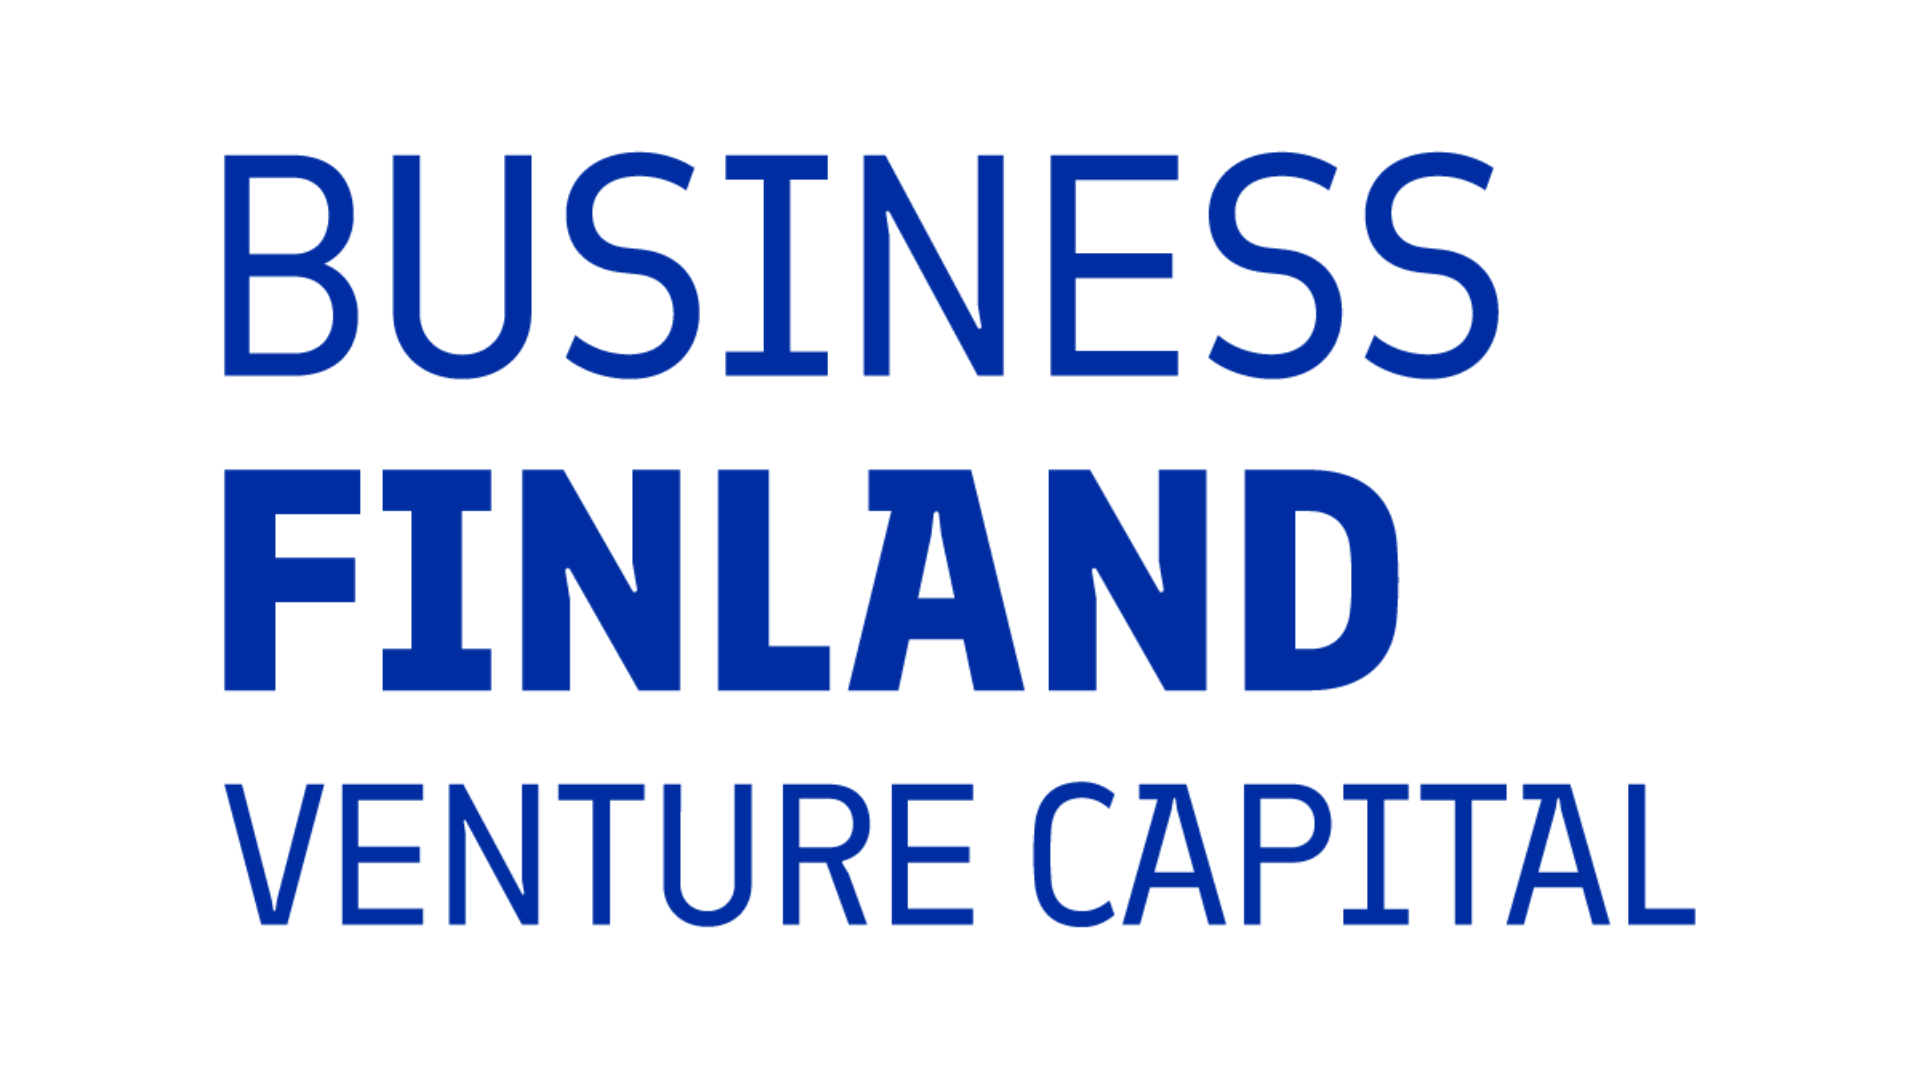 Business Finland Venture Capital joins FiBAN to support business angels in their investment activities